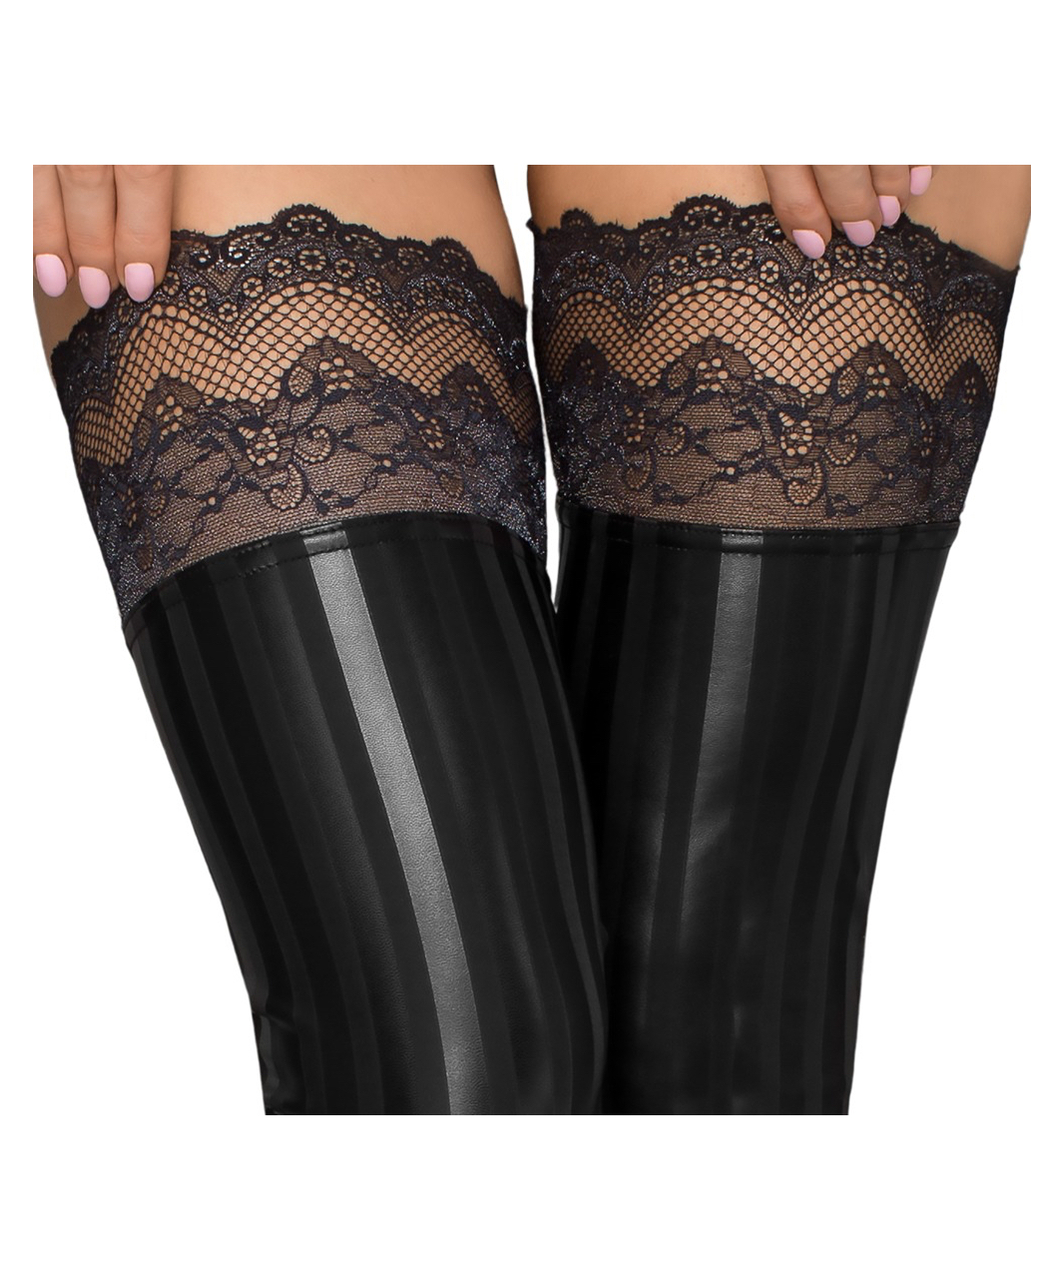 Noir Handmade black striped hold up stockings with lace